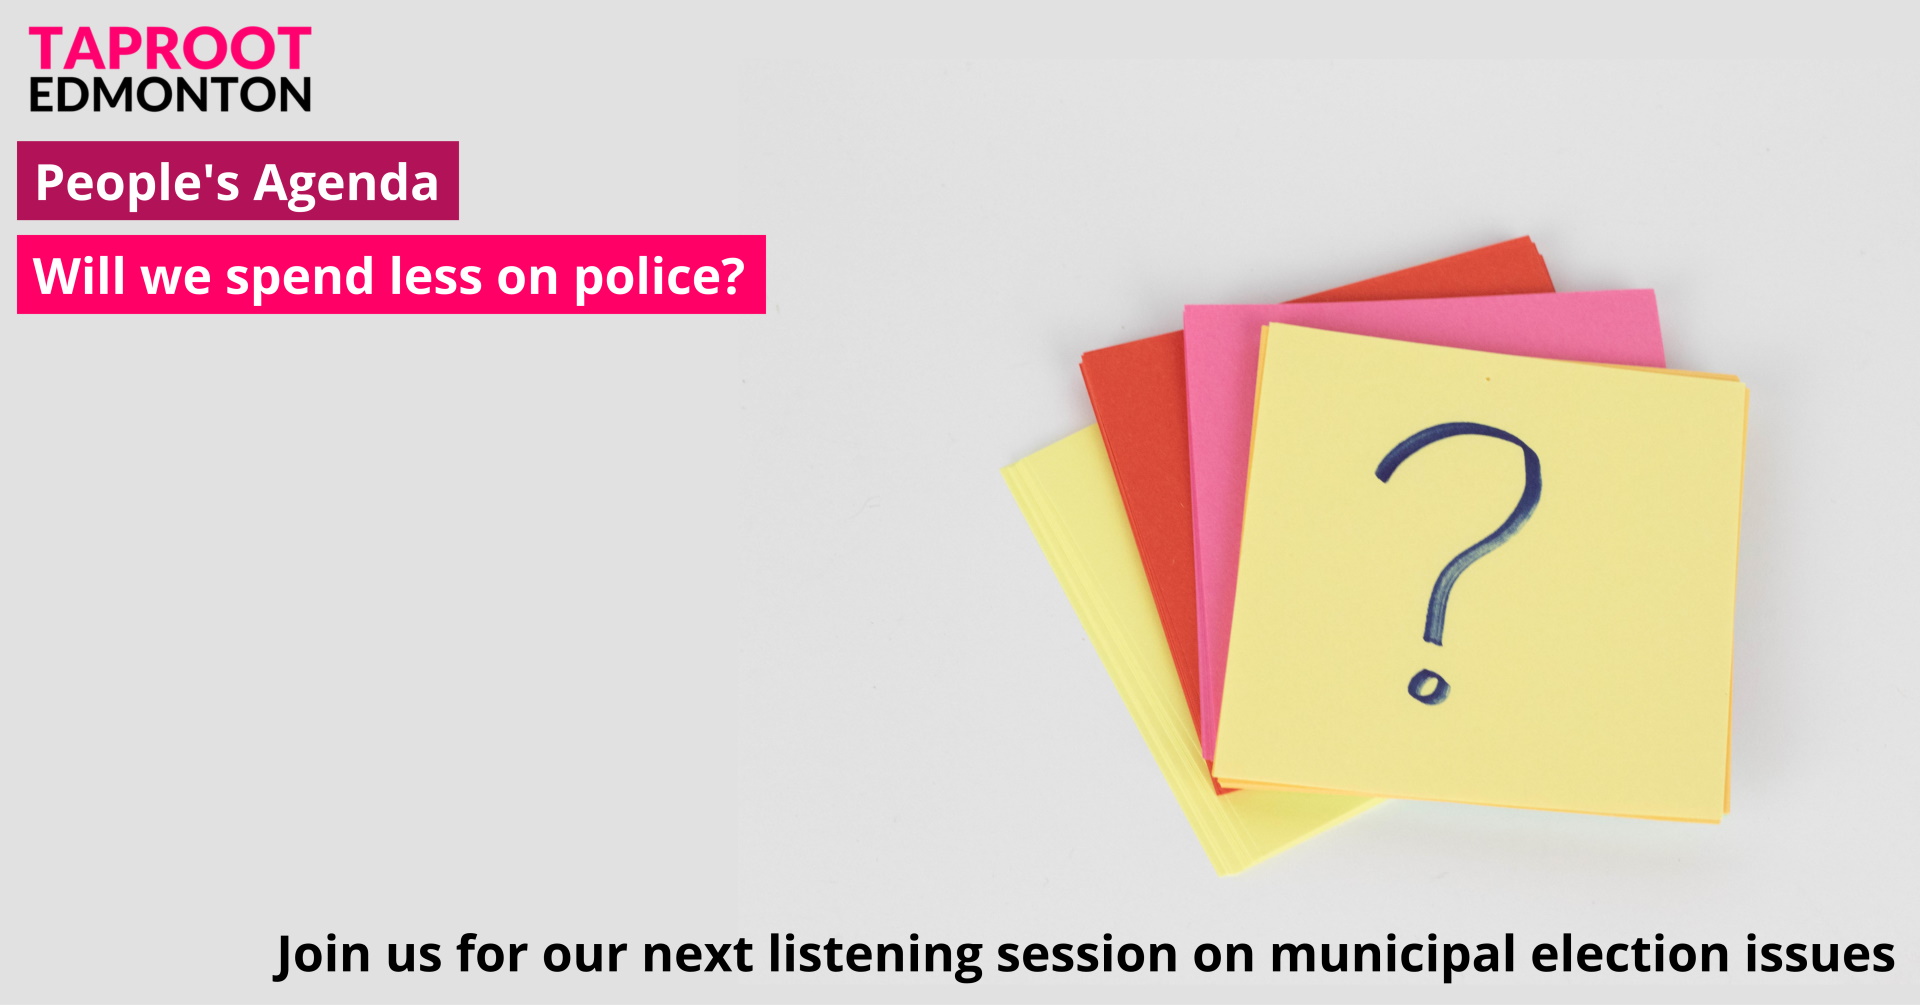 Share your thoughts about police funding on April 8